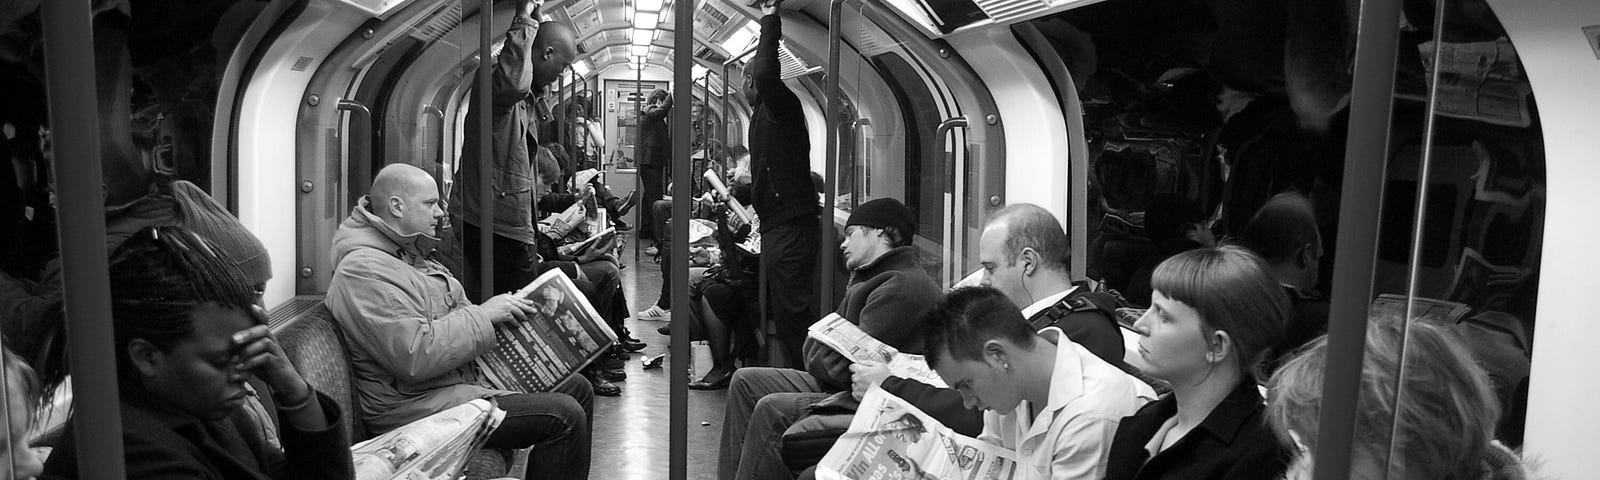 Black and white photo of commuters on the metro/subway reading newspapers. Routine mornings for workers on their way to work.